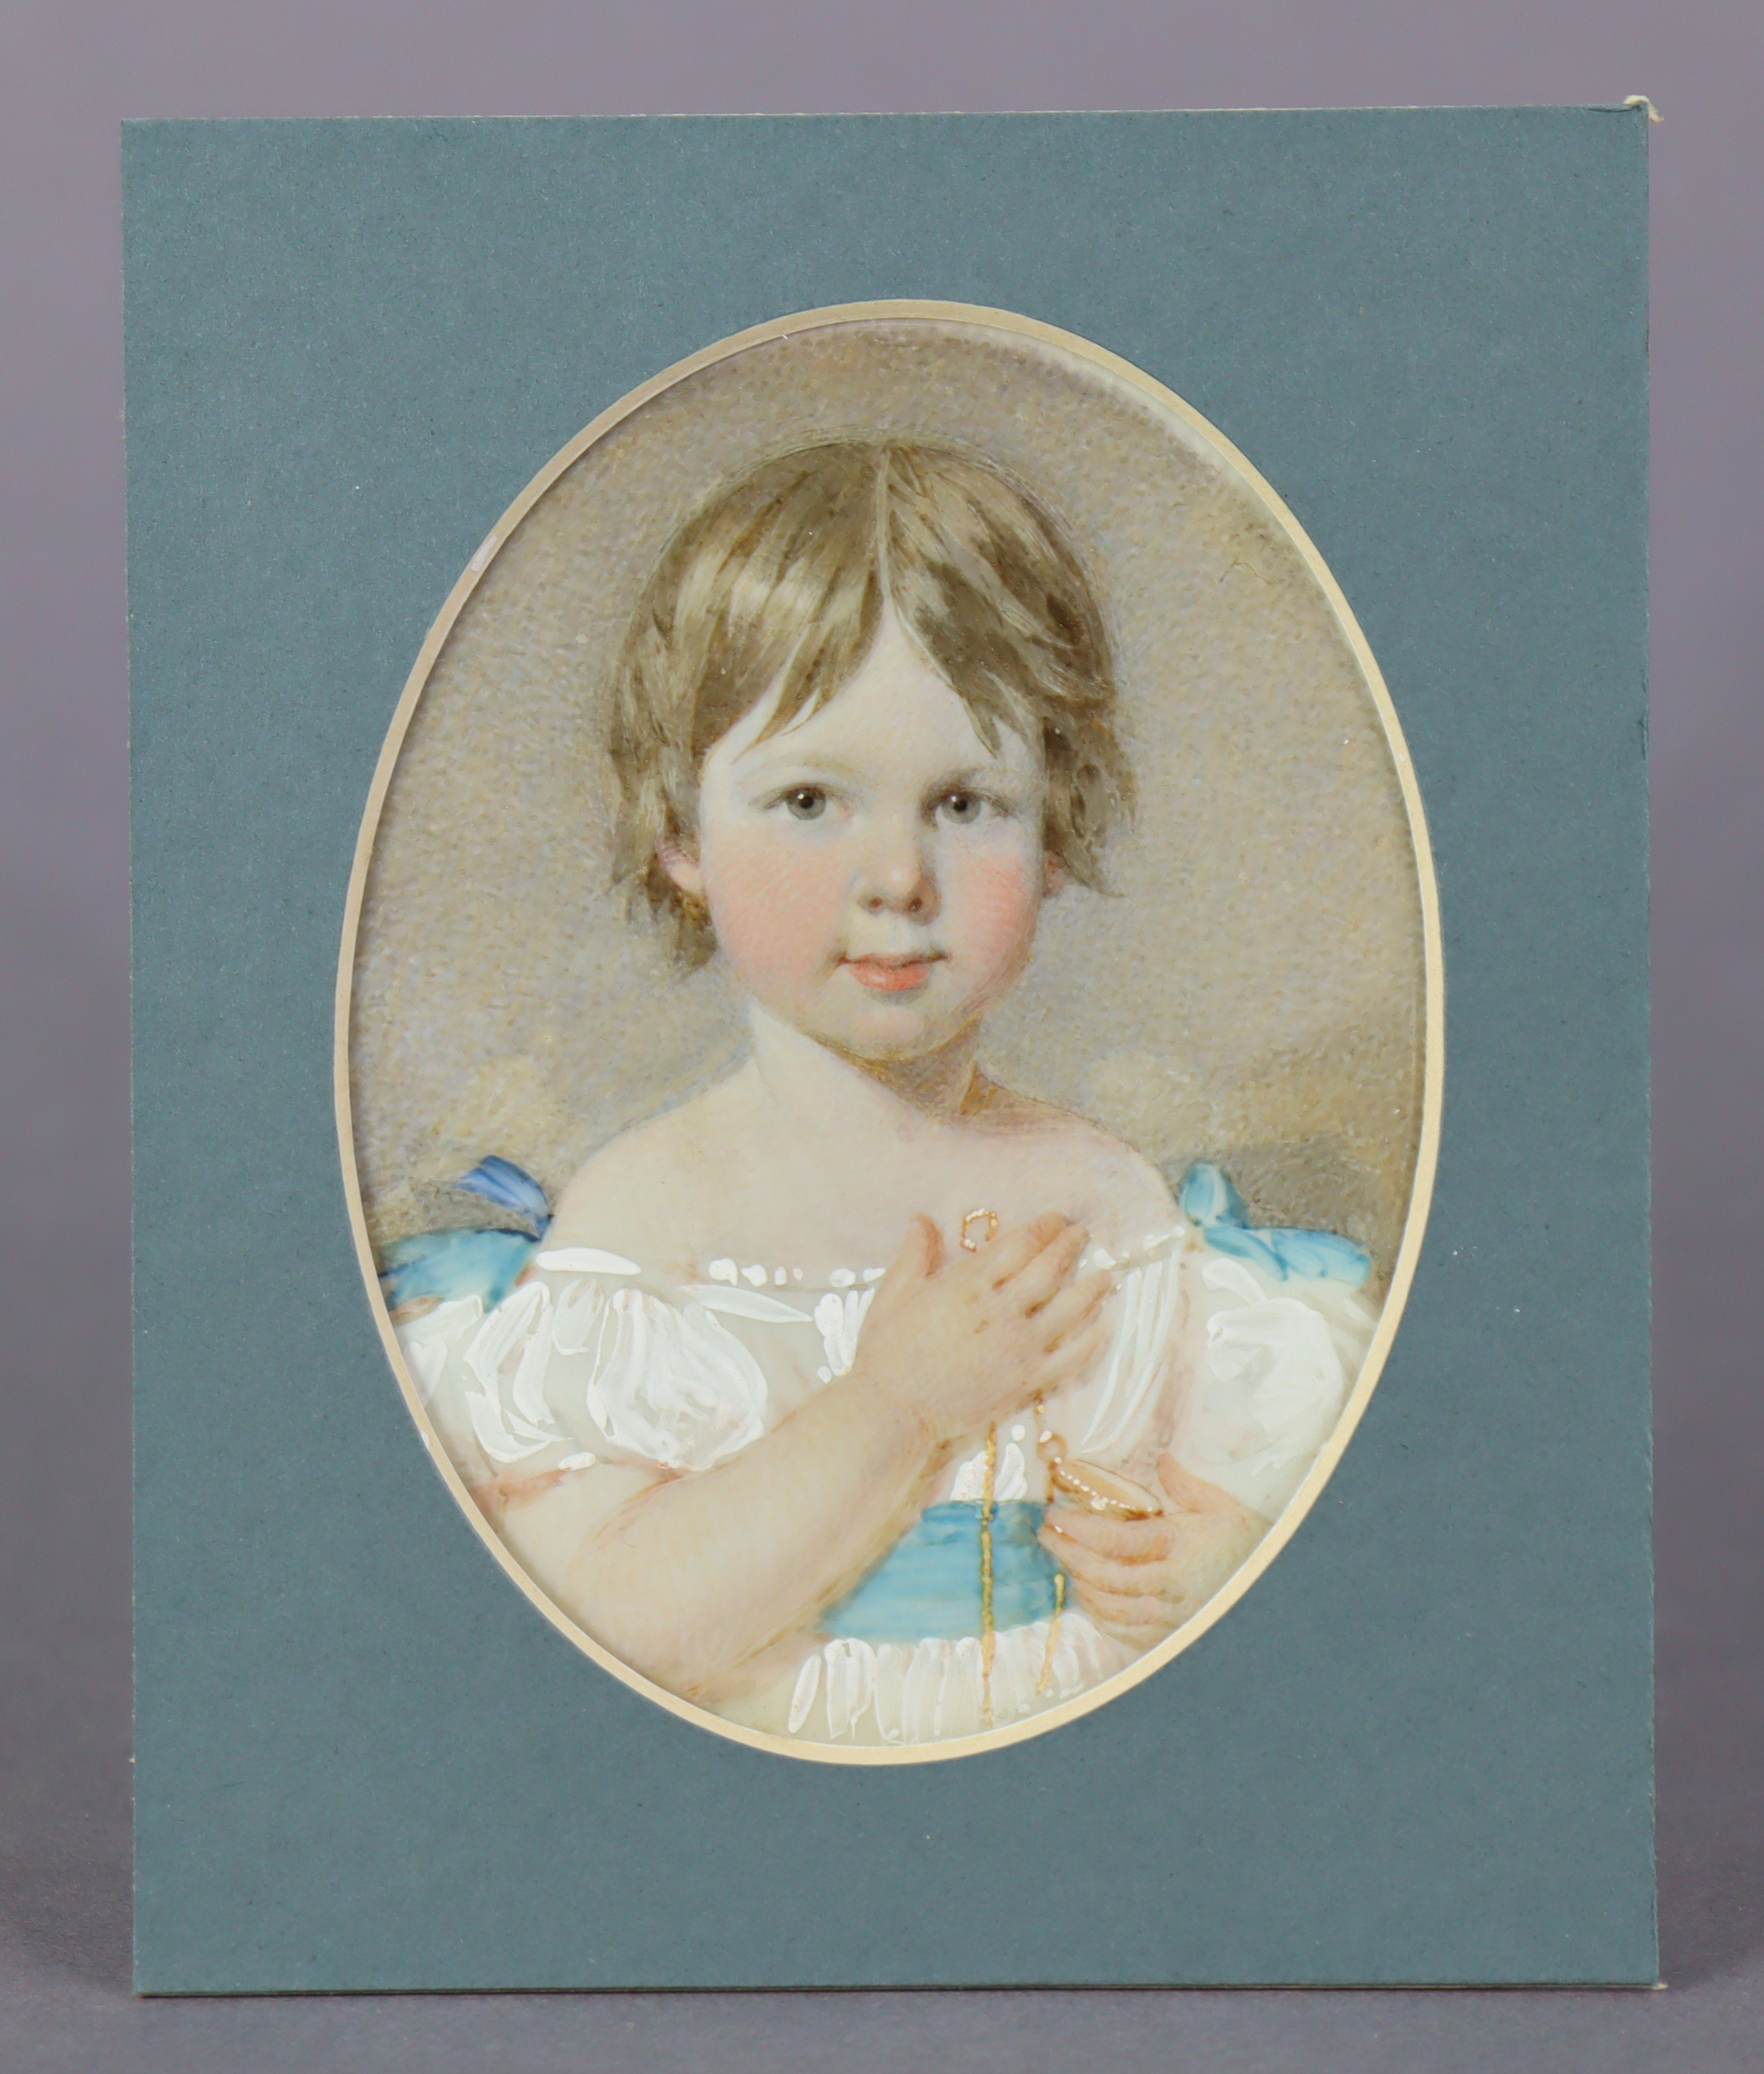 ENGLISH SCHOOL late 19th/early 20th century. A portrait miniature of a young girl wearing white - Image 2 of 4